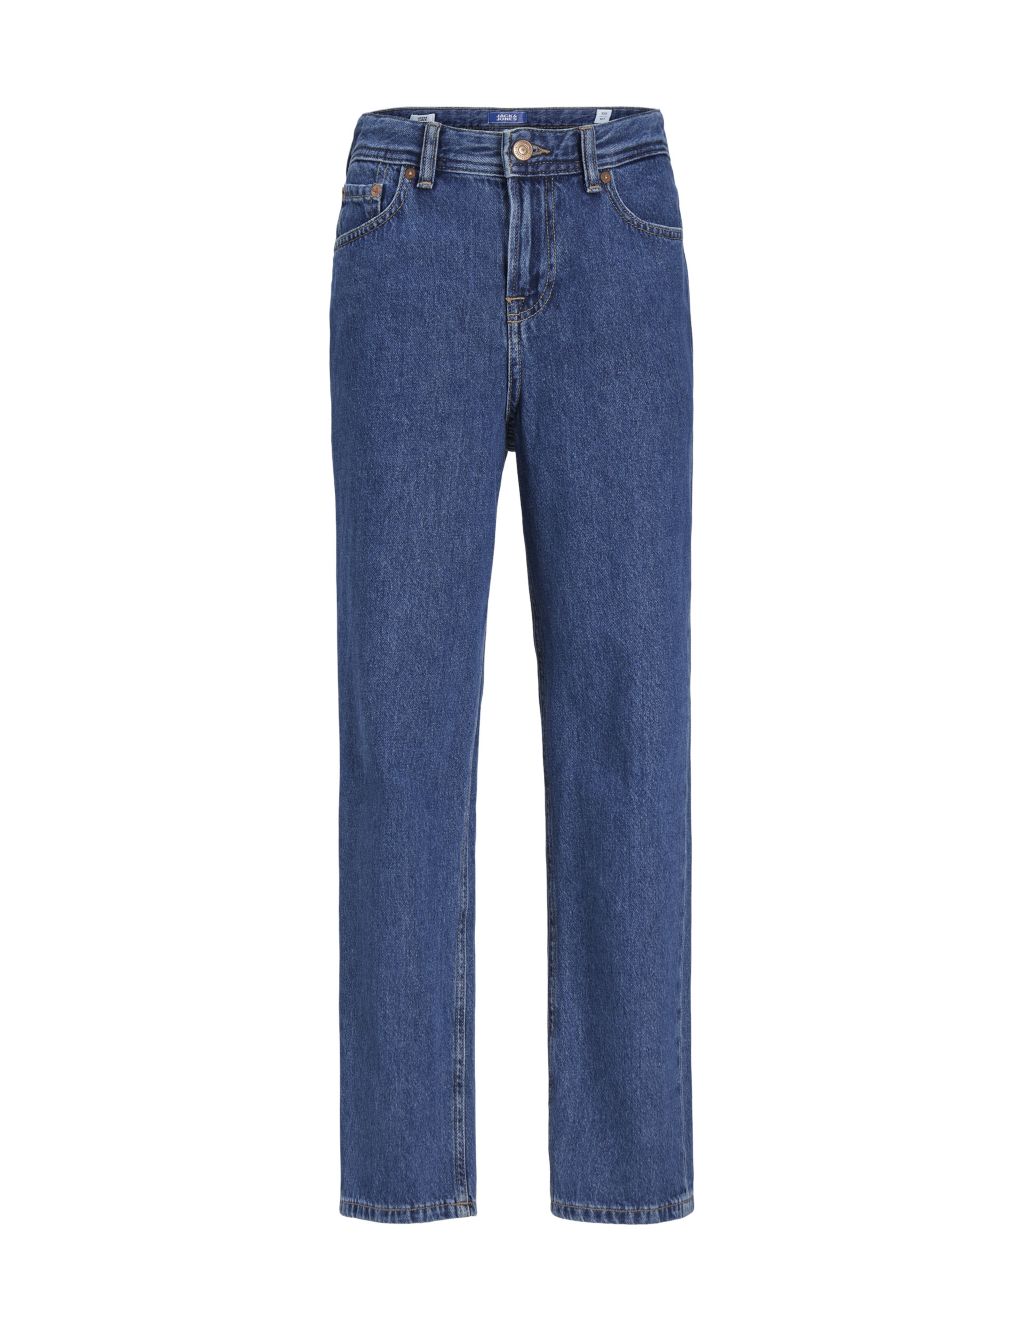 Relaxed Pure Cotton Jeans (8-16 Yrs) image 2